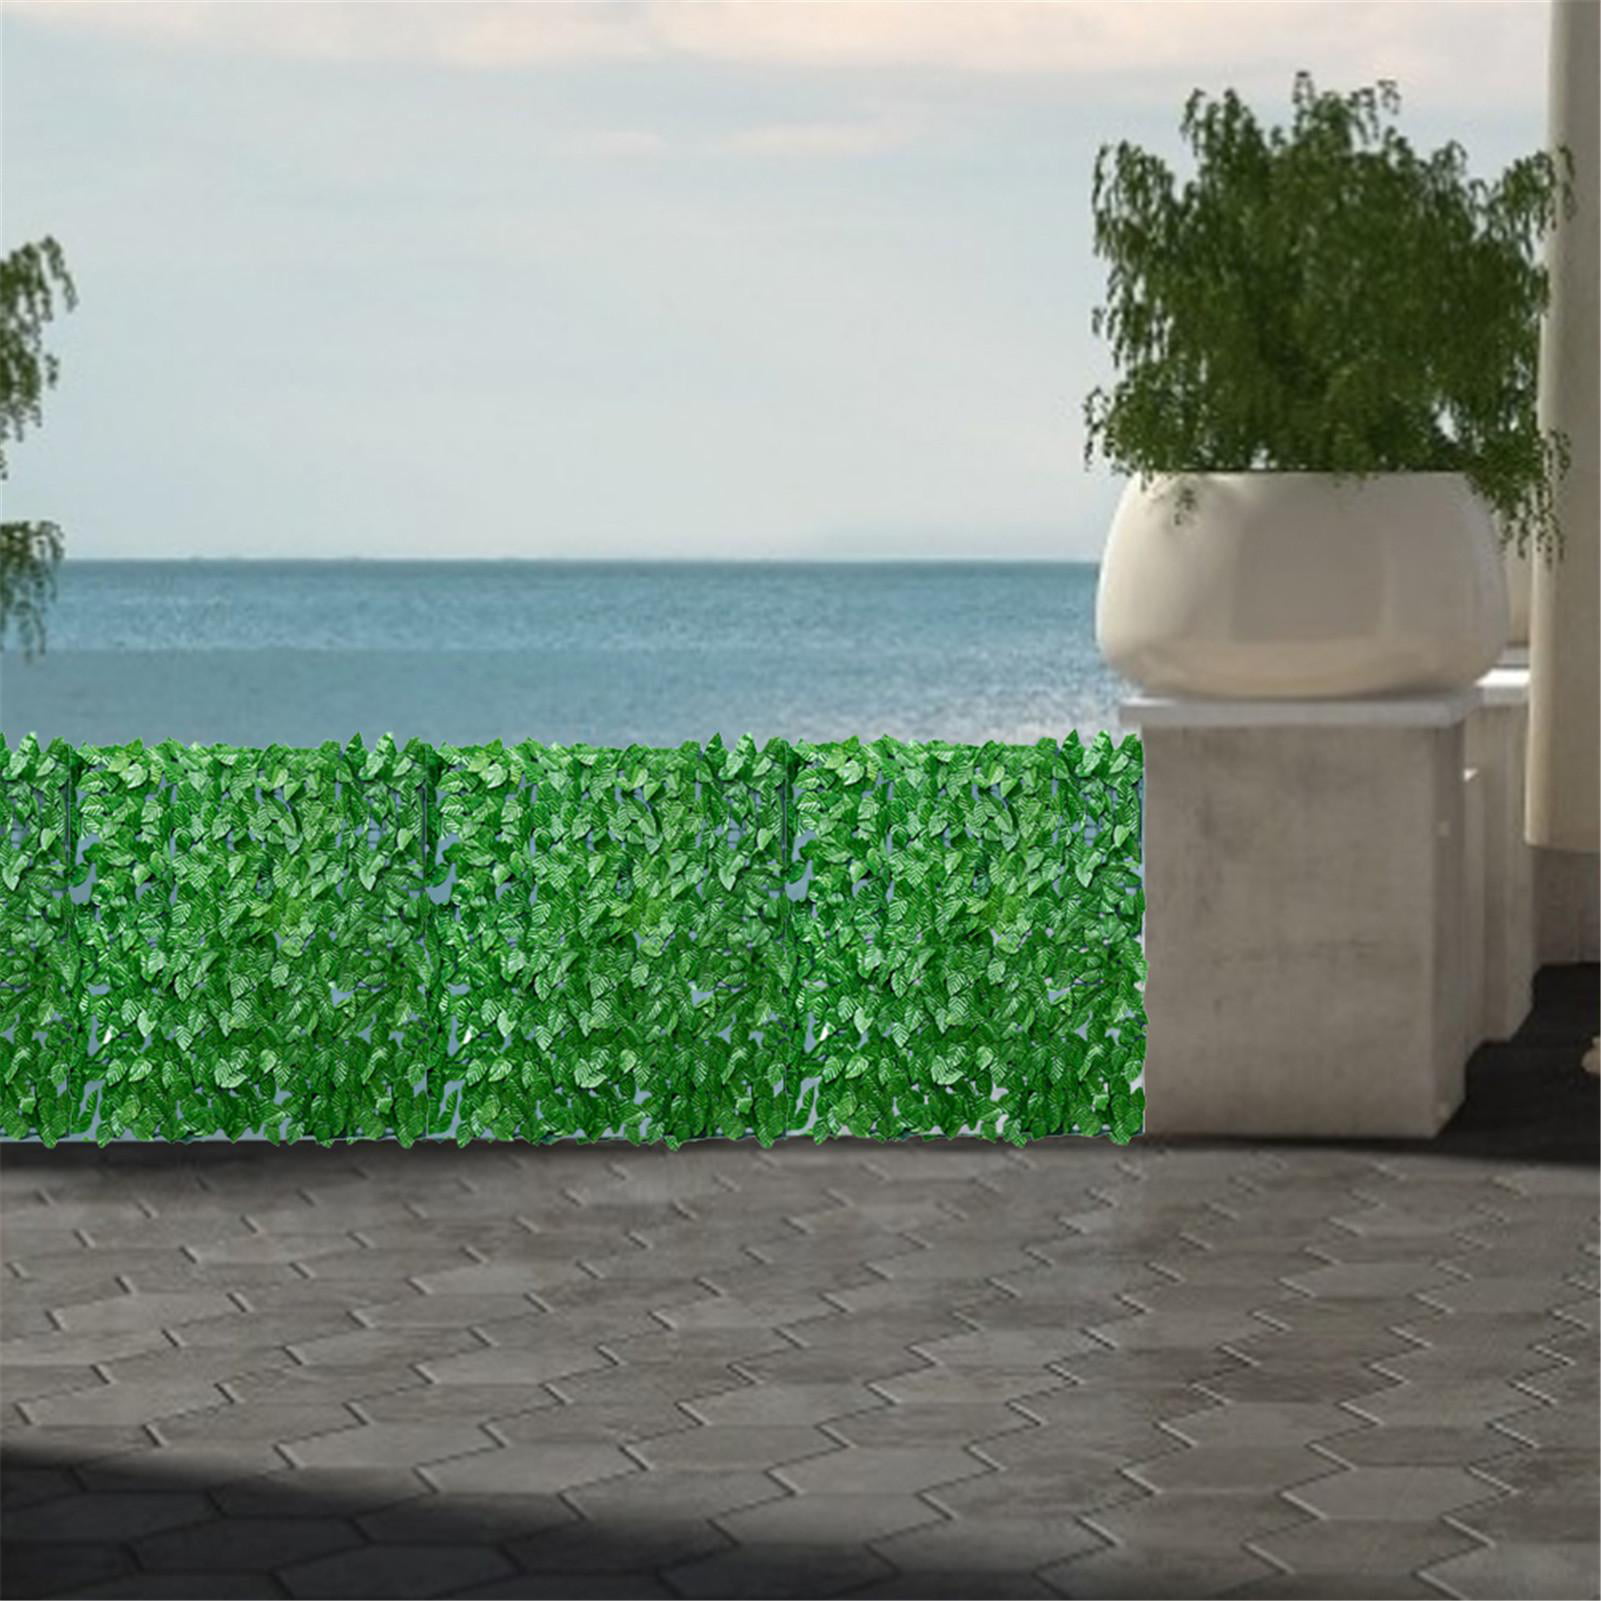 OOTD Artificial Leaf Screening Roll Uv Fade Protection Privacy Hedging Wall Landscaping Garden Fence Balcony Screen Decoration Tools For Indoor Outdoor Decor Ivy Watermelon Hedge Panel